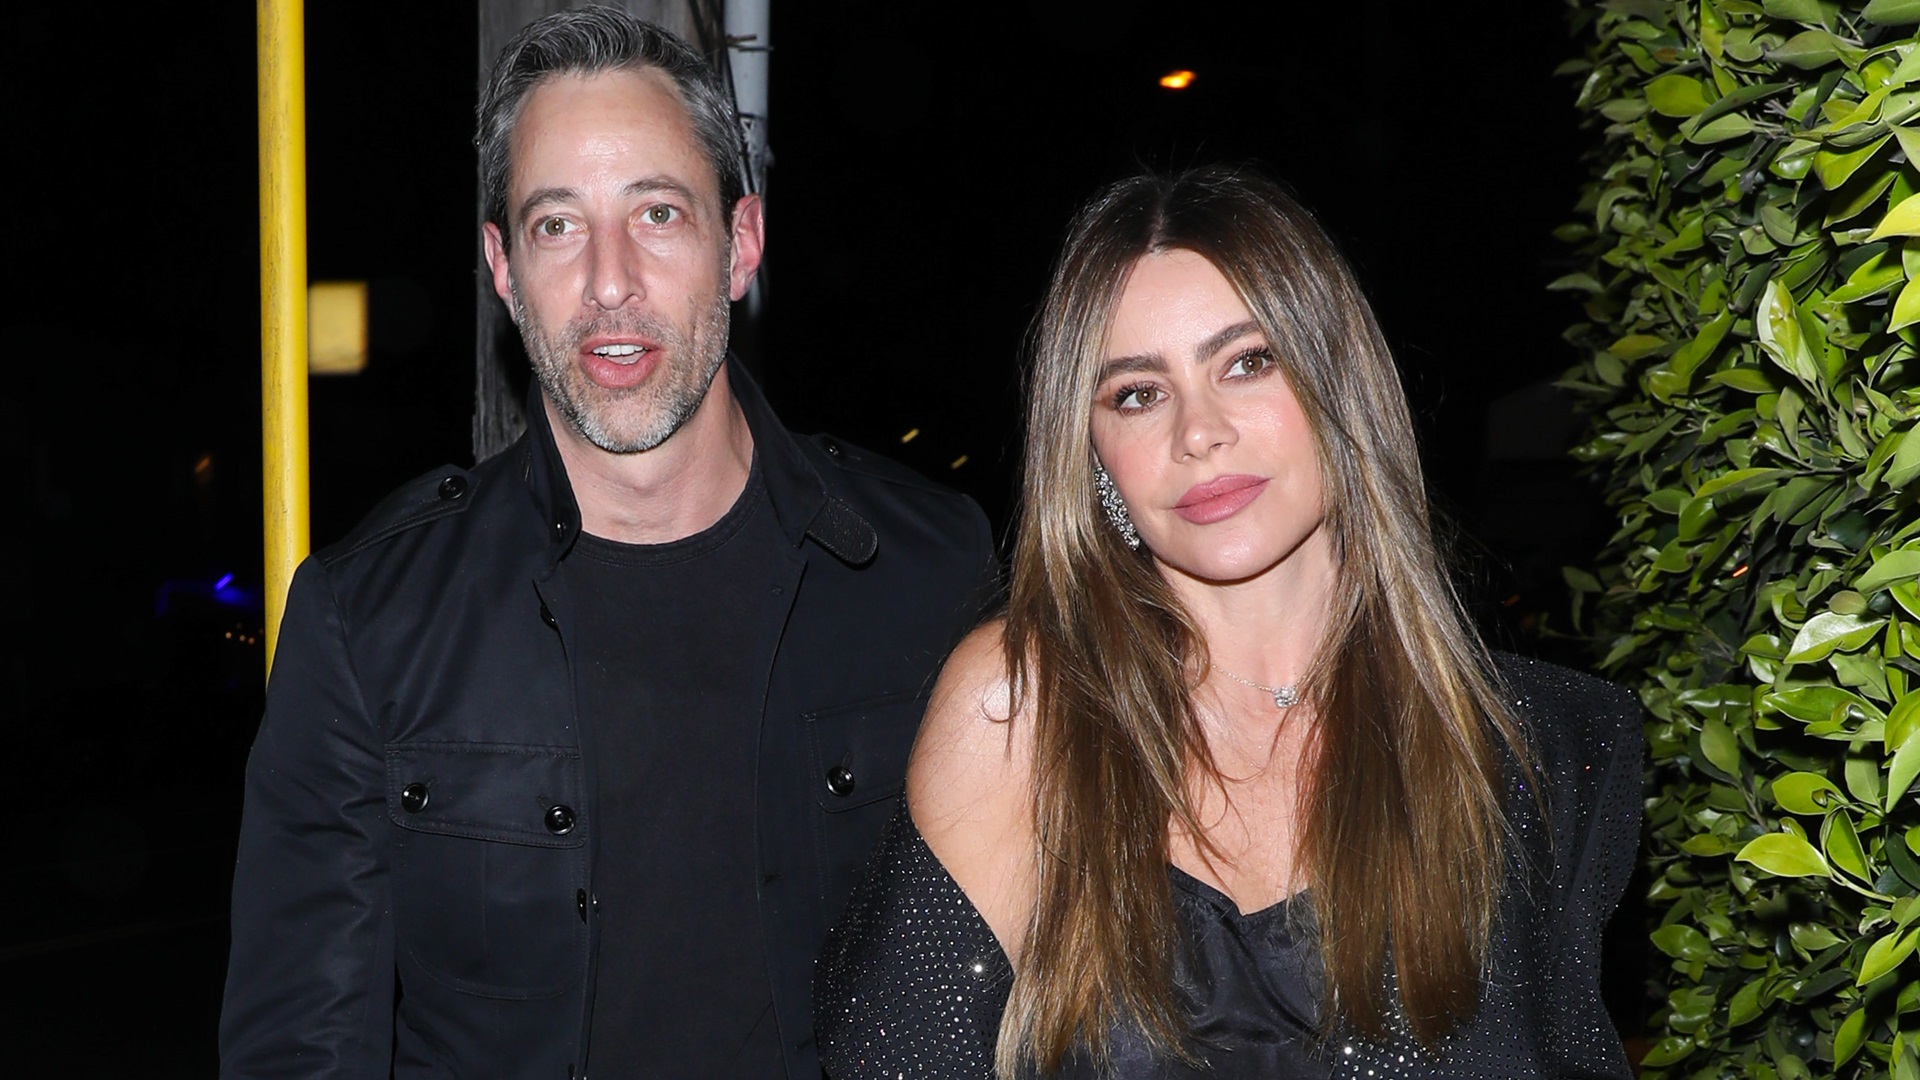 Sofia Vergara confirms her relationship with Justin Saliman